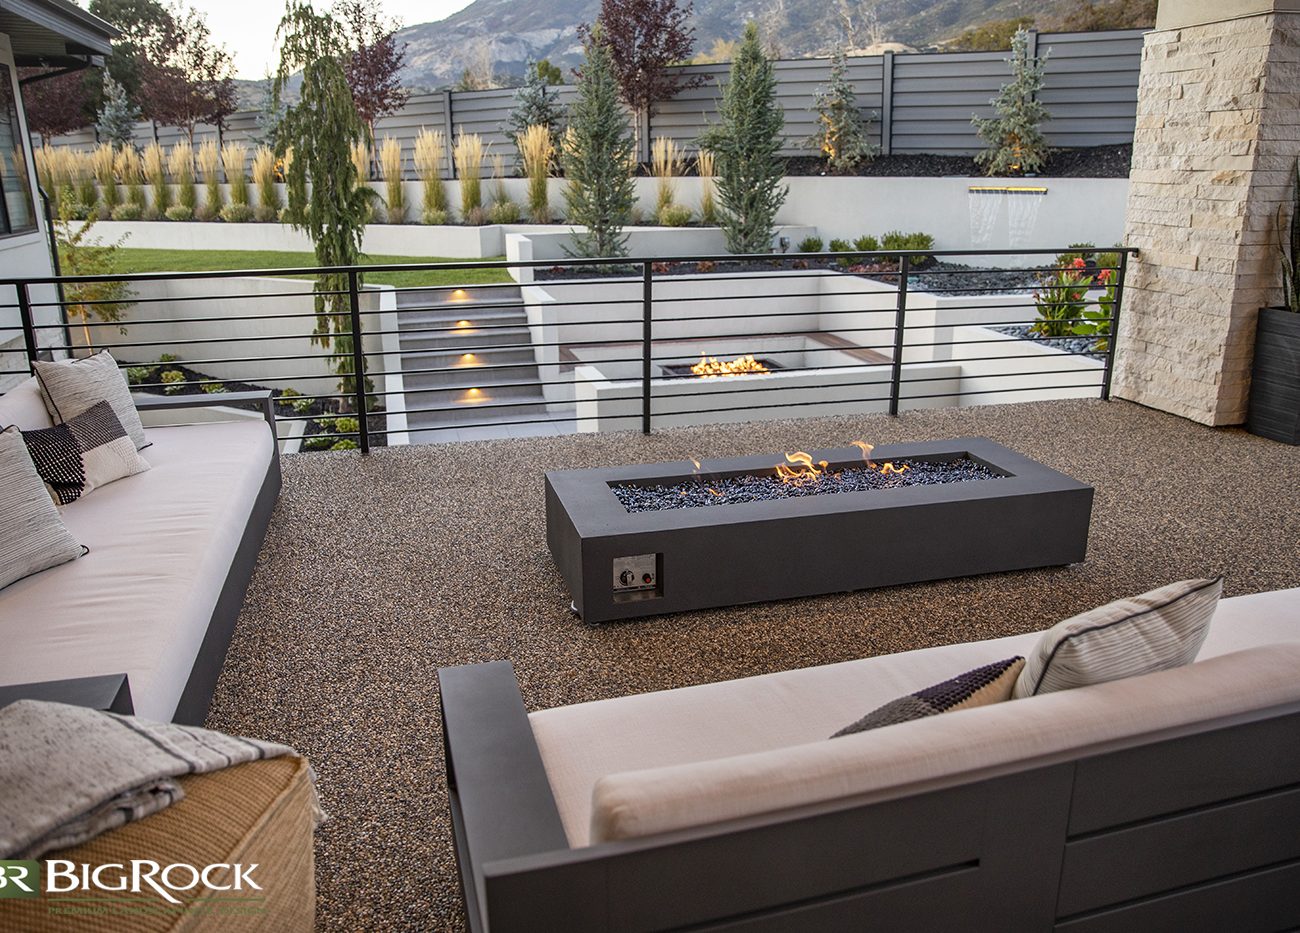 Luxury backyard landscaping is important in building an outdoor entertaining space that is large, elegant and with exceptional views.